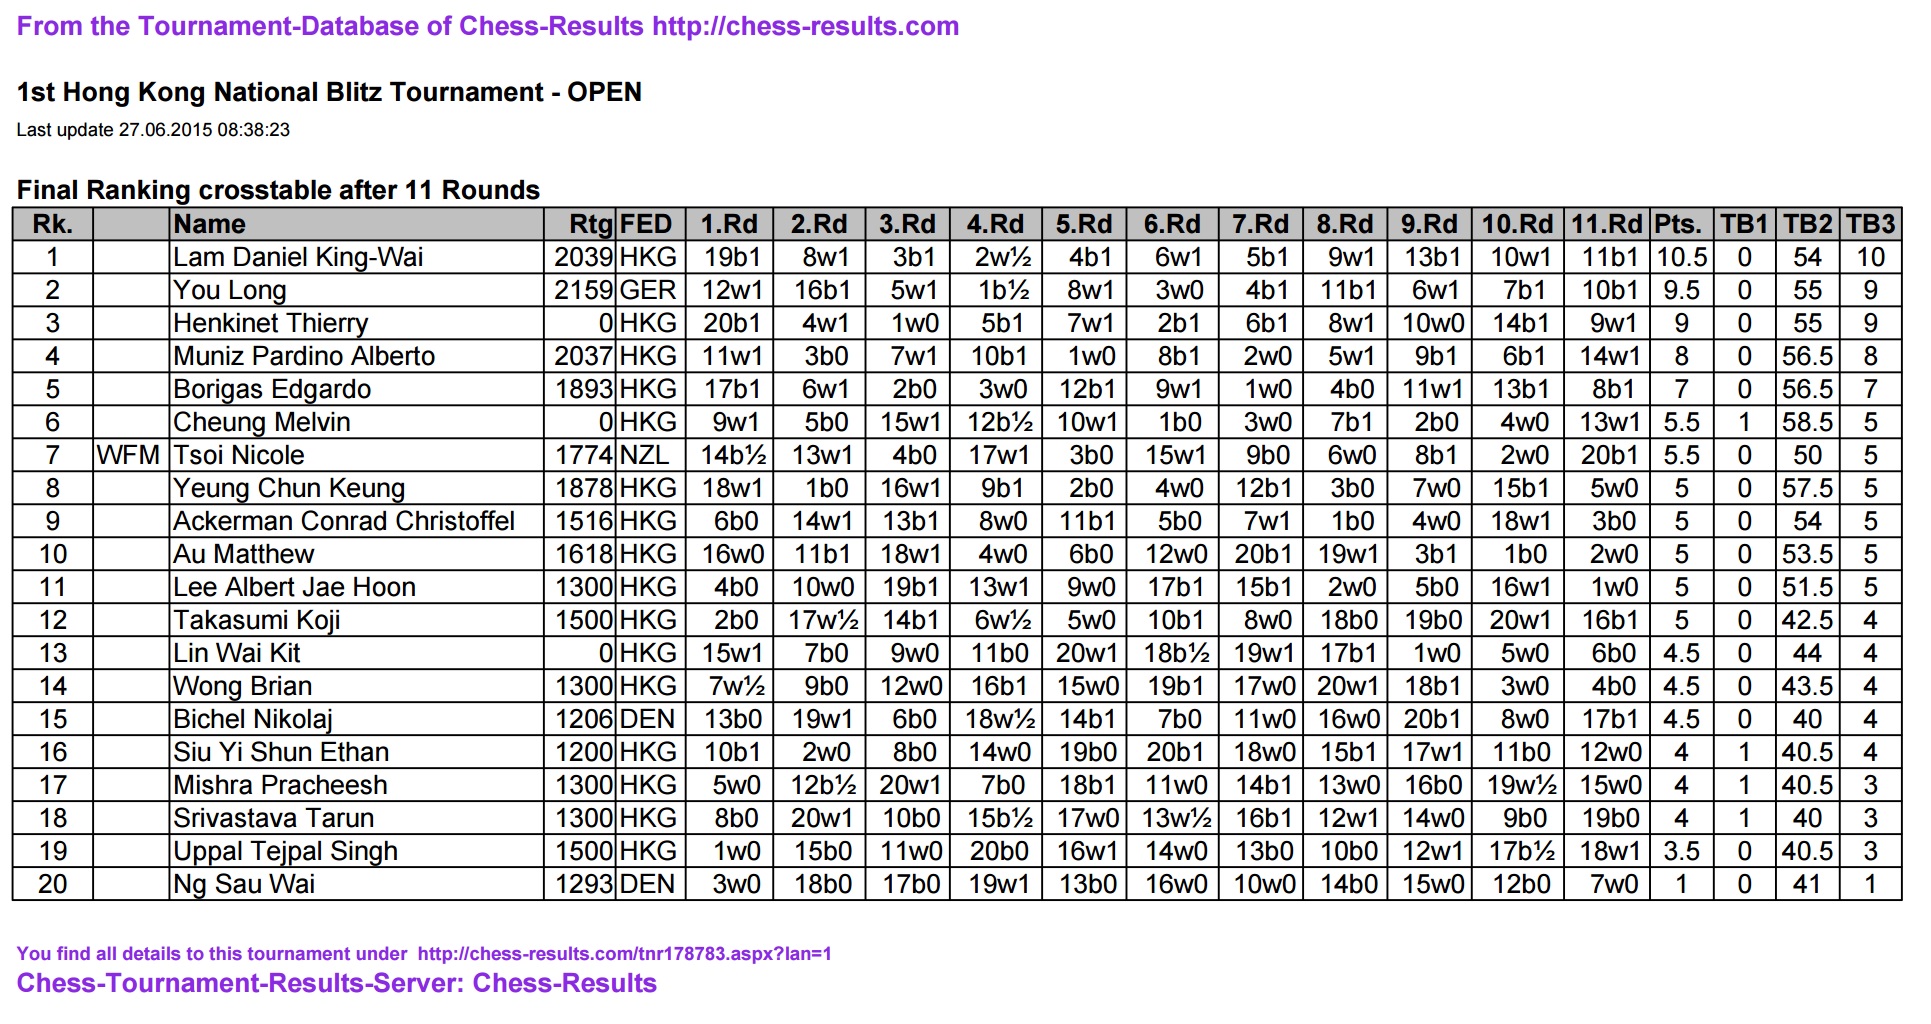 From the Tournament-Database of Chess Results